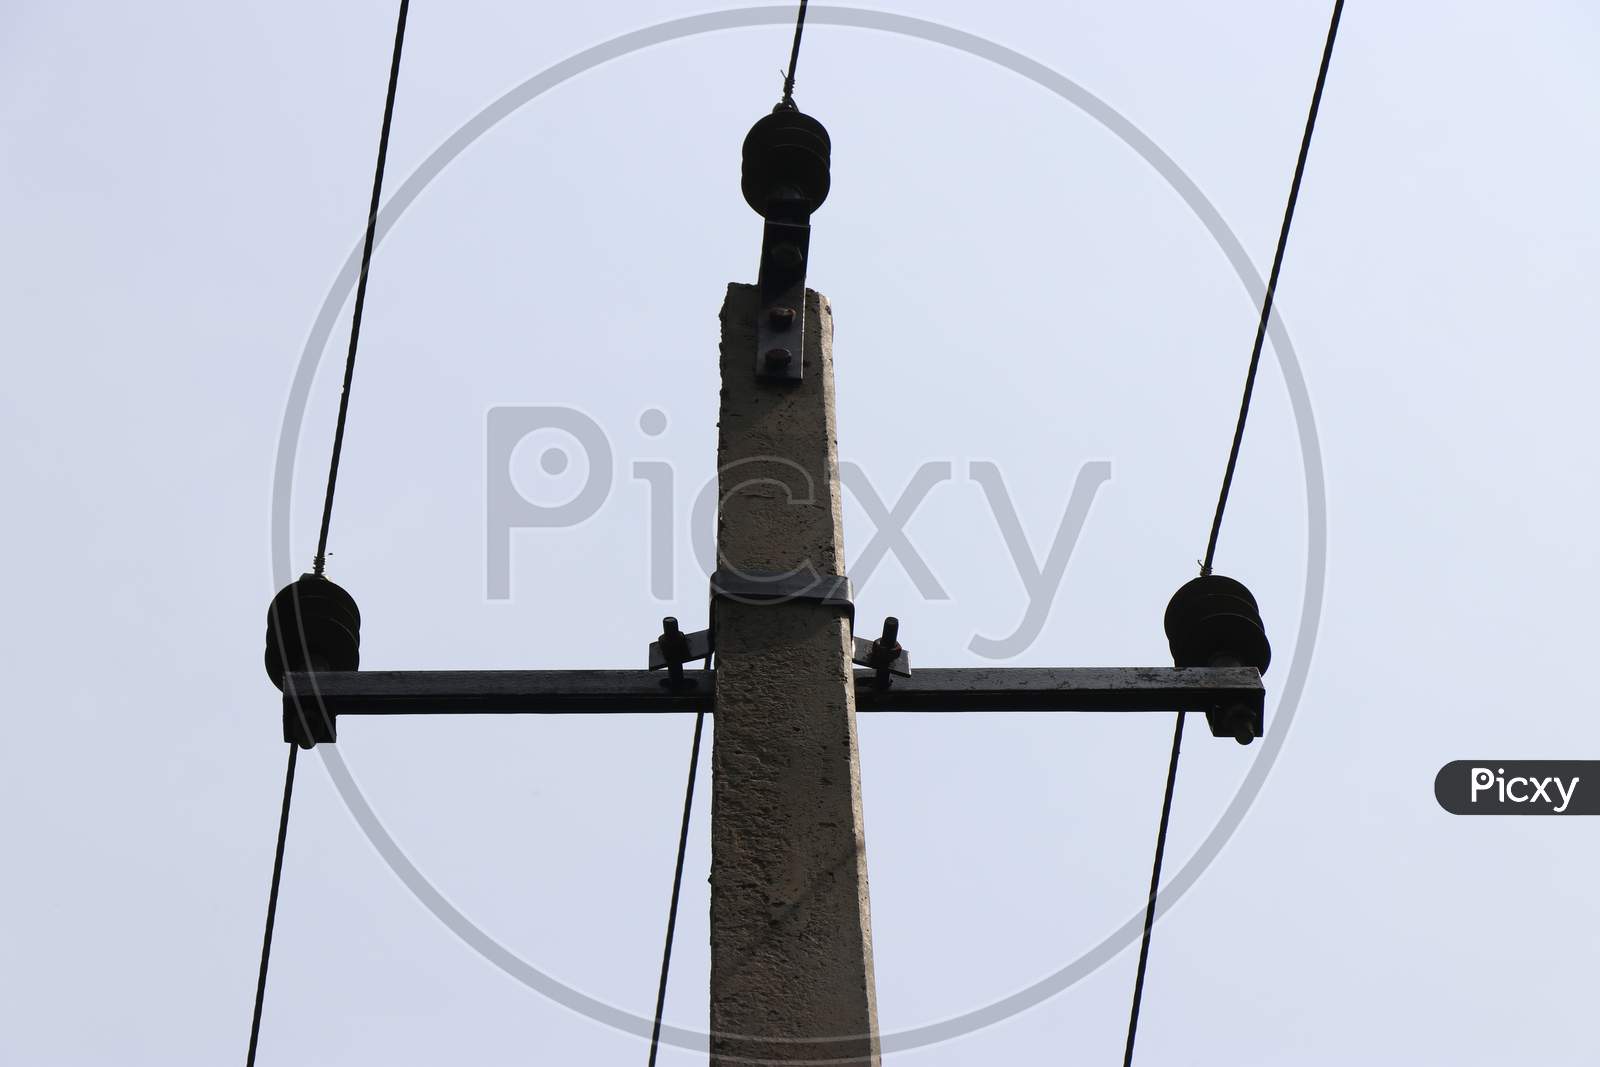 Electric Pole Made Of Concrete Carrying 3 Wires Which Gives Current Supply For Homes